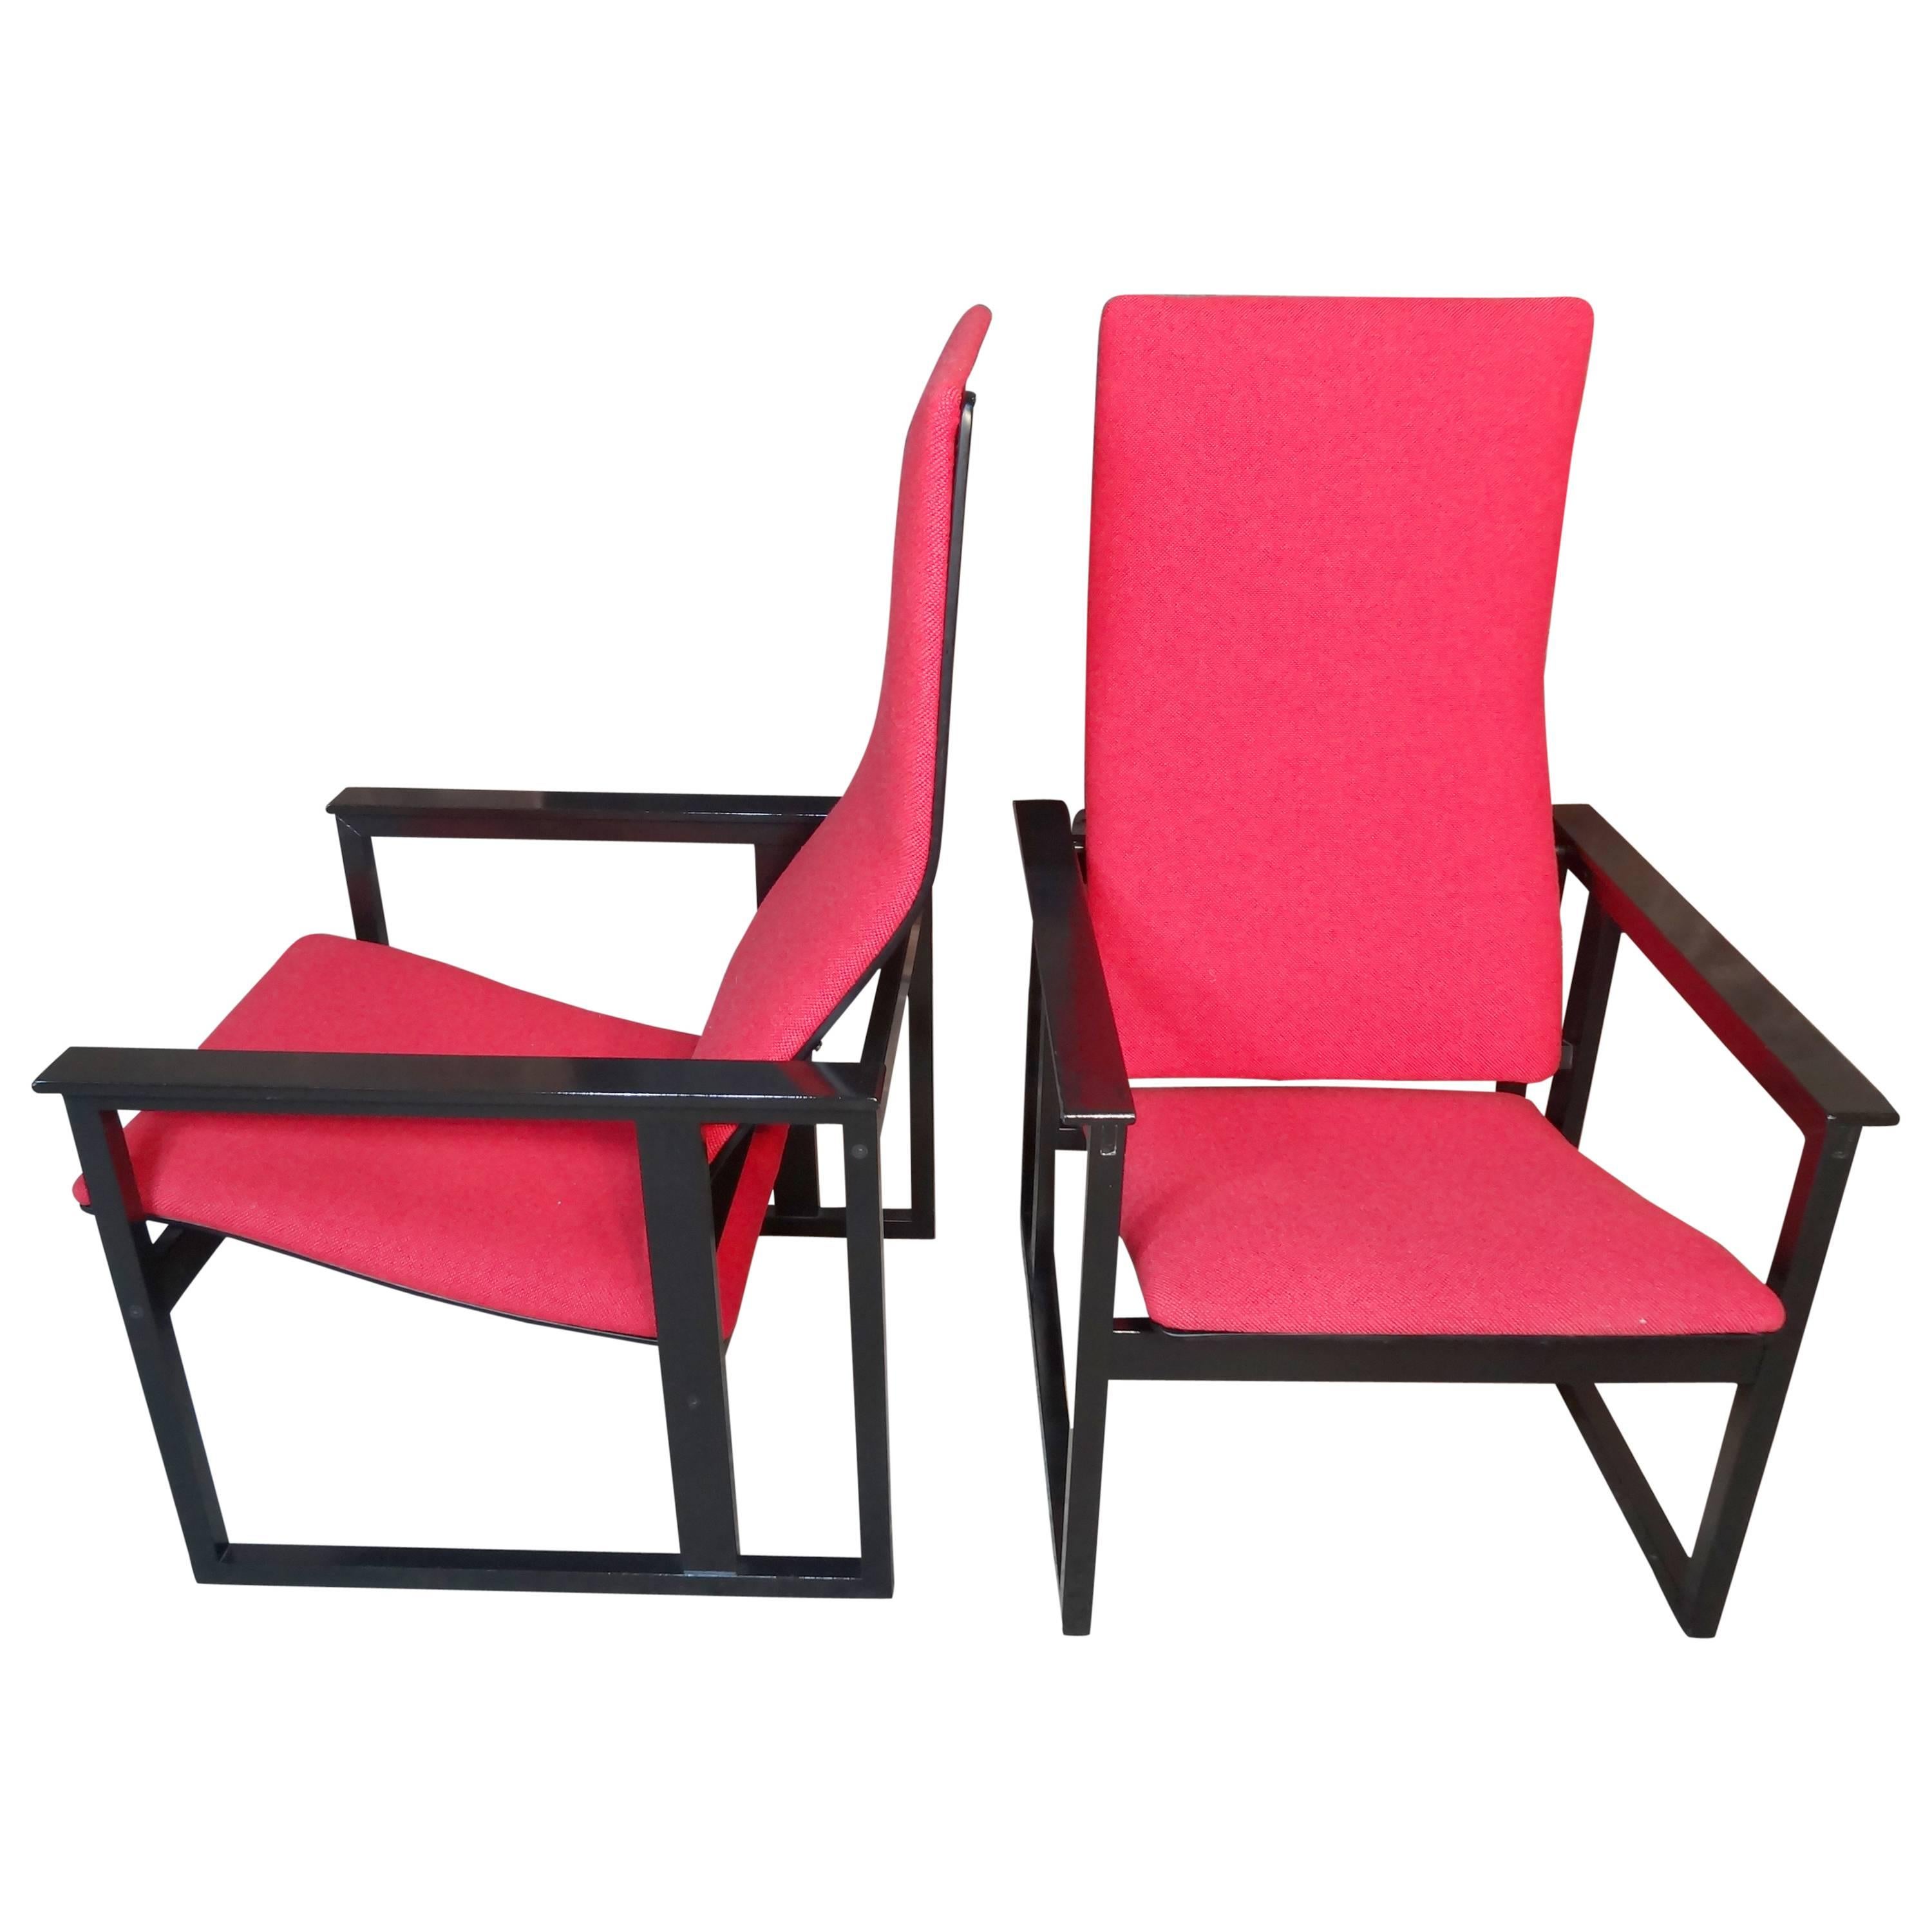 Designer armchair from Simo Heikkila fabrikant Pentik, Finland, 1980s. Stunning chairs out the design of Atzan from 1885-1990, the chairs are newly upholstered with new Kvadrant fabric! 

 Measures: Seat height 40cm, height 105cm, depth 75cm,